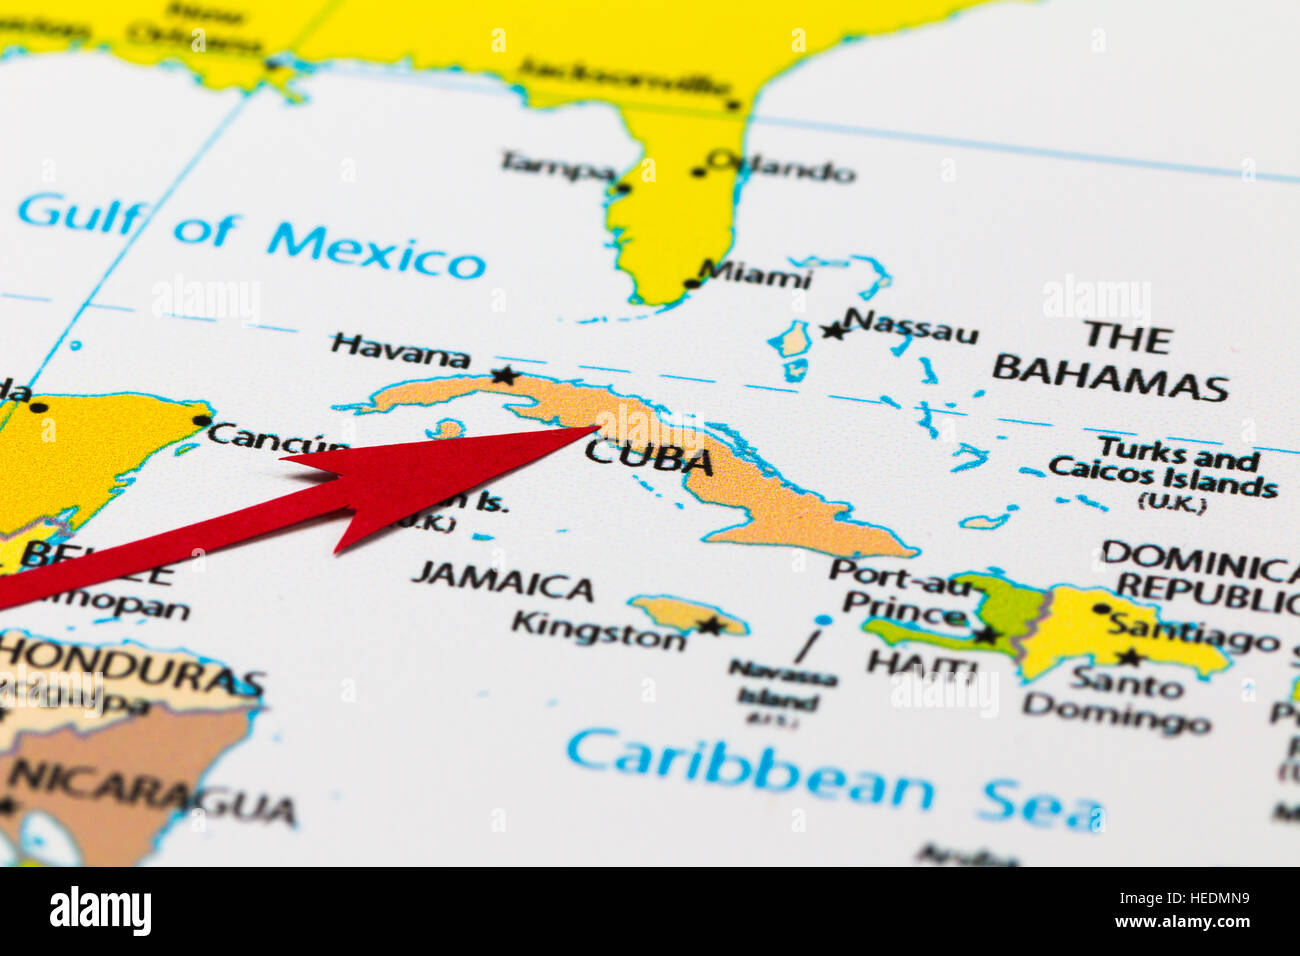 Red arrow pointing Cuba on the map of Caribbean region and north America continent Stock Photo